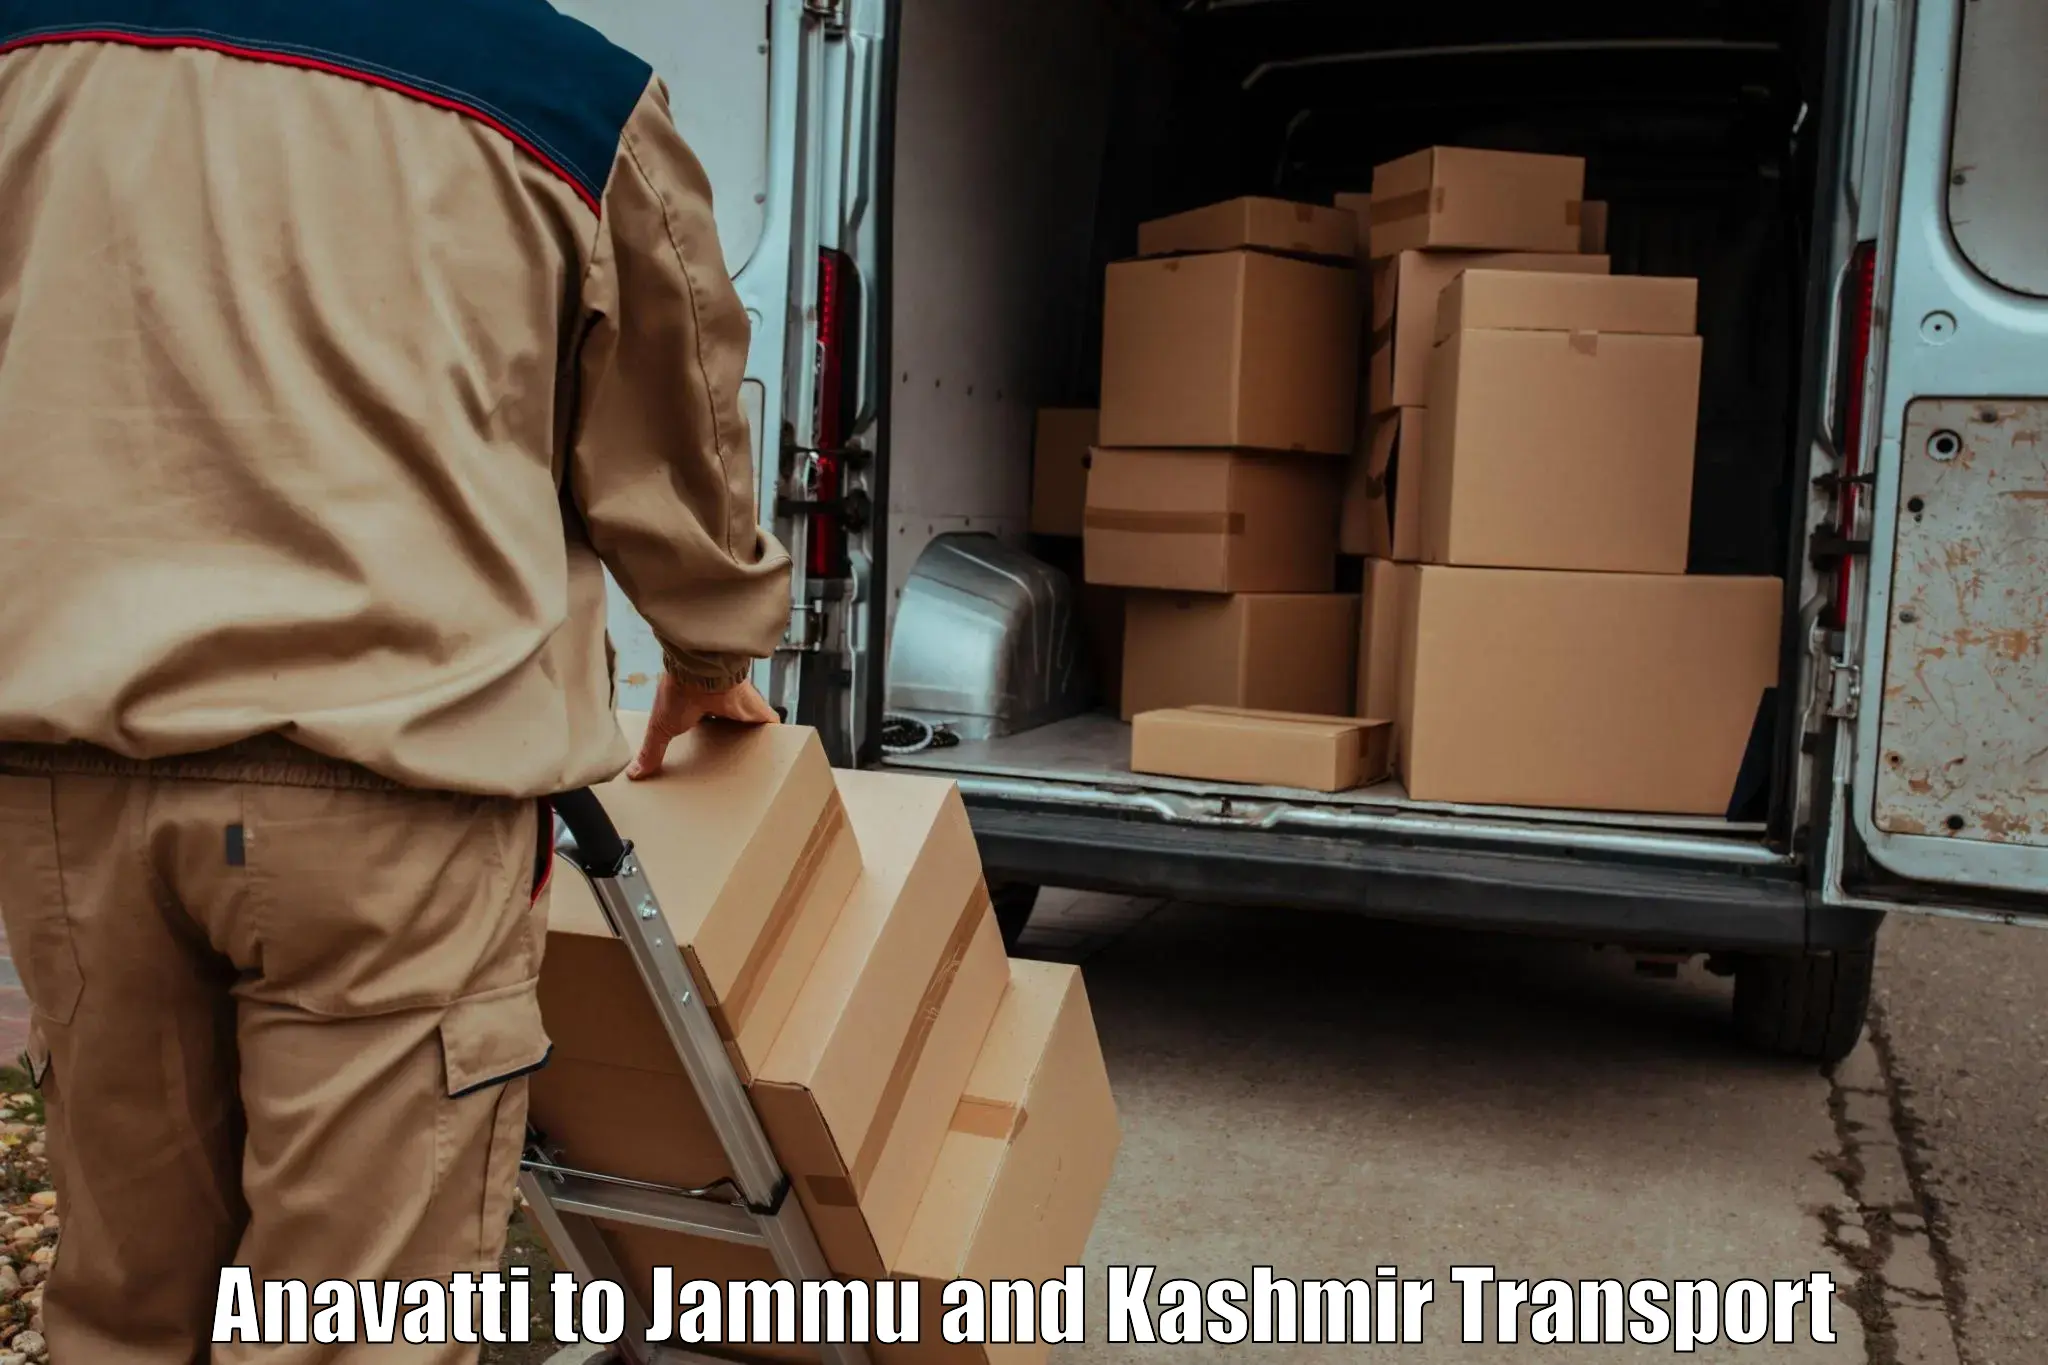 Delivery service Anavatti to Poonch